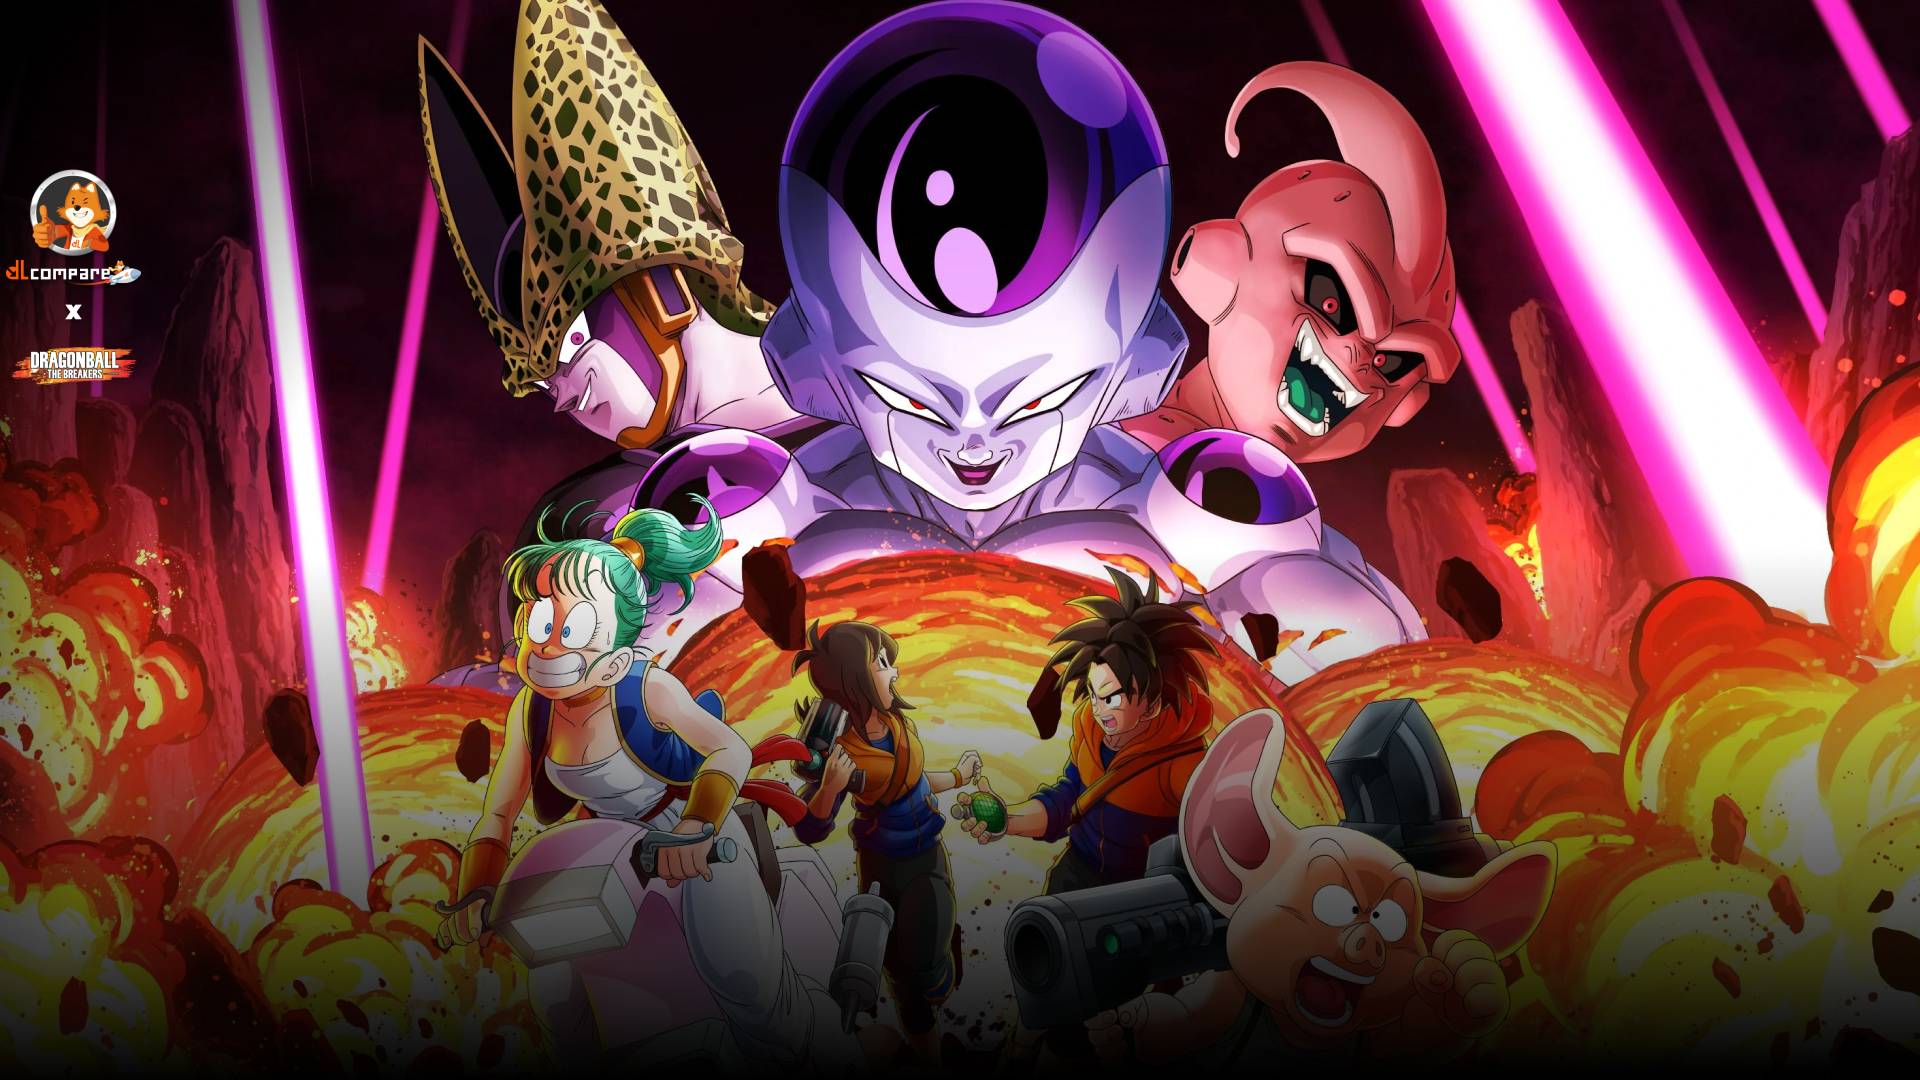 Will you be a Raider or a Survivor in Dragon Ball The Breakers?